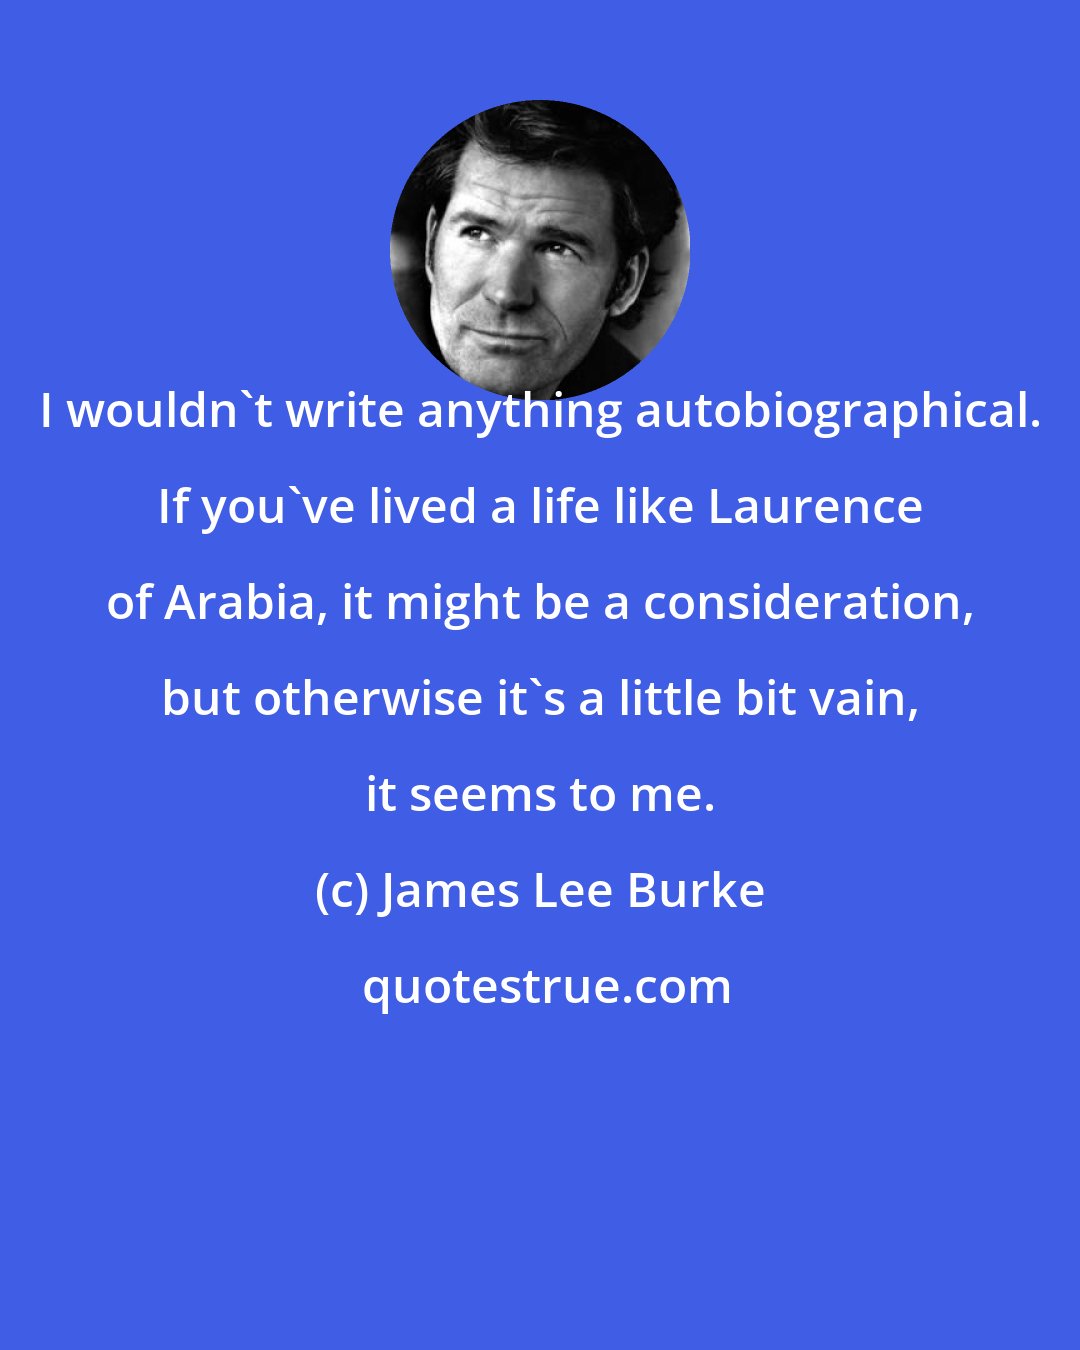 James Lee Burke: I wouldn't write anything autobiographical. If you've lived a life like Laurence of Arabia, it might be a consideration, but otherwise it's a little bit vain, it seems to me.